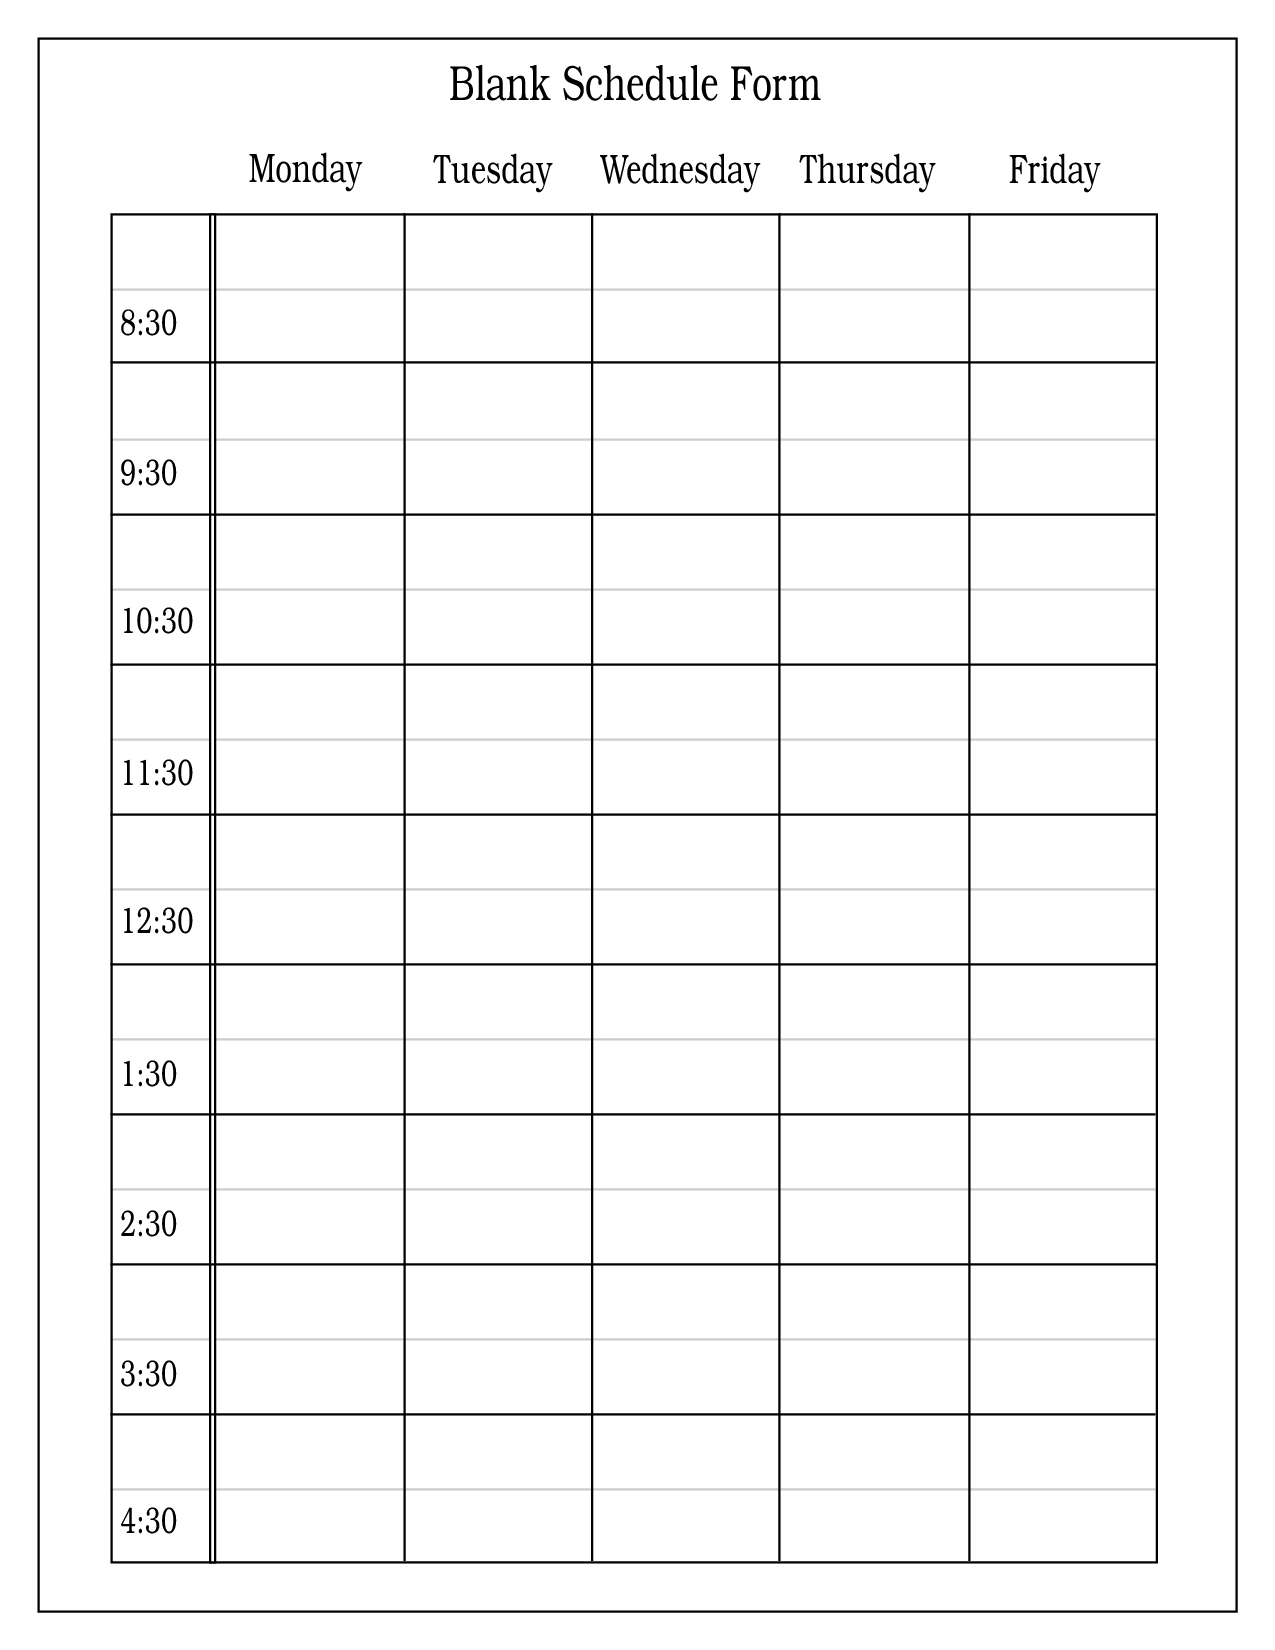 Employee Scheduling - Download A Free Employee Schedule Template For intended for Blank Calendar Chart For Classrooms